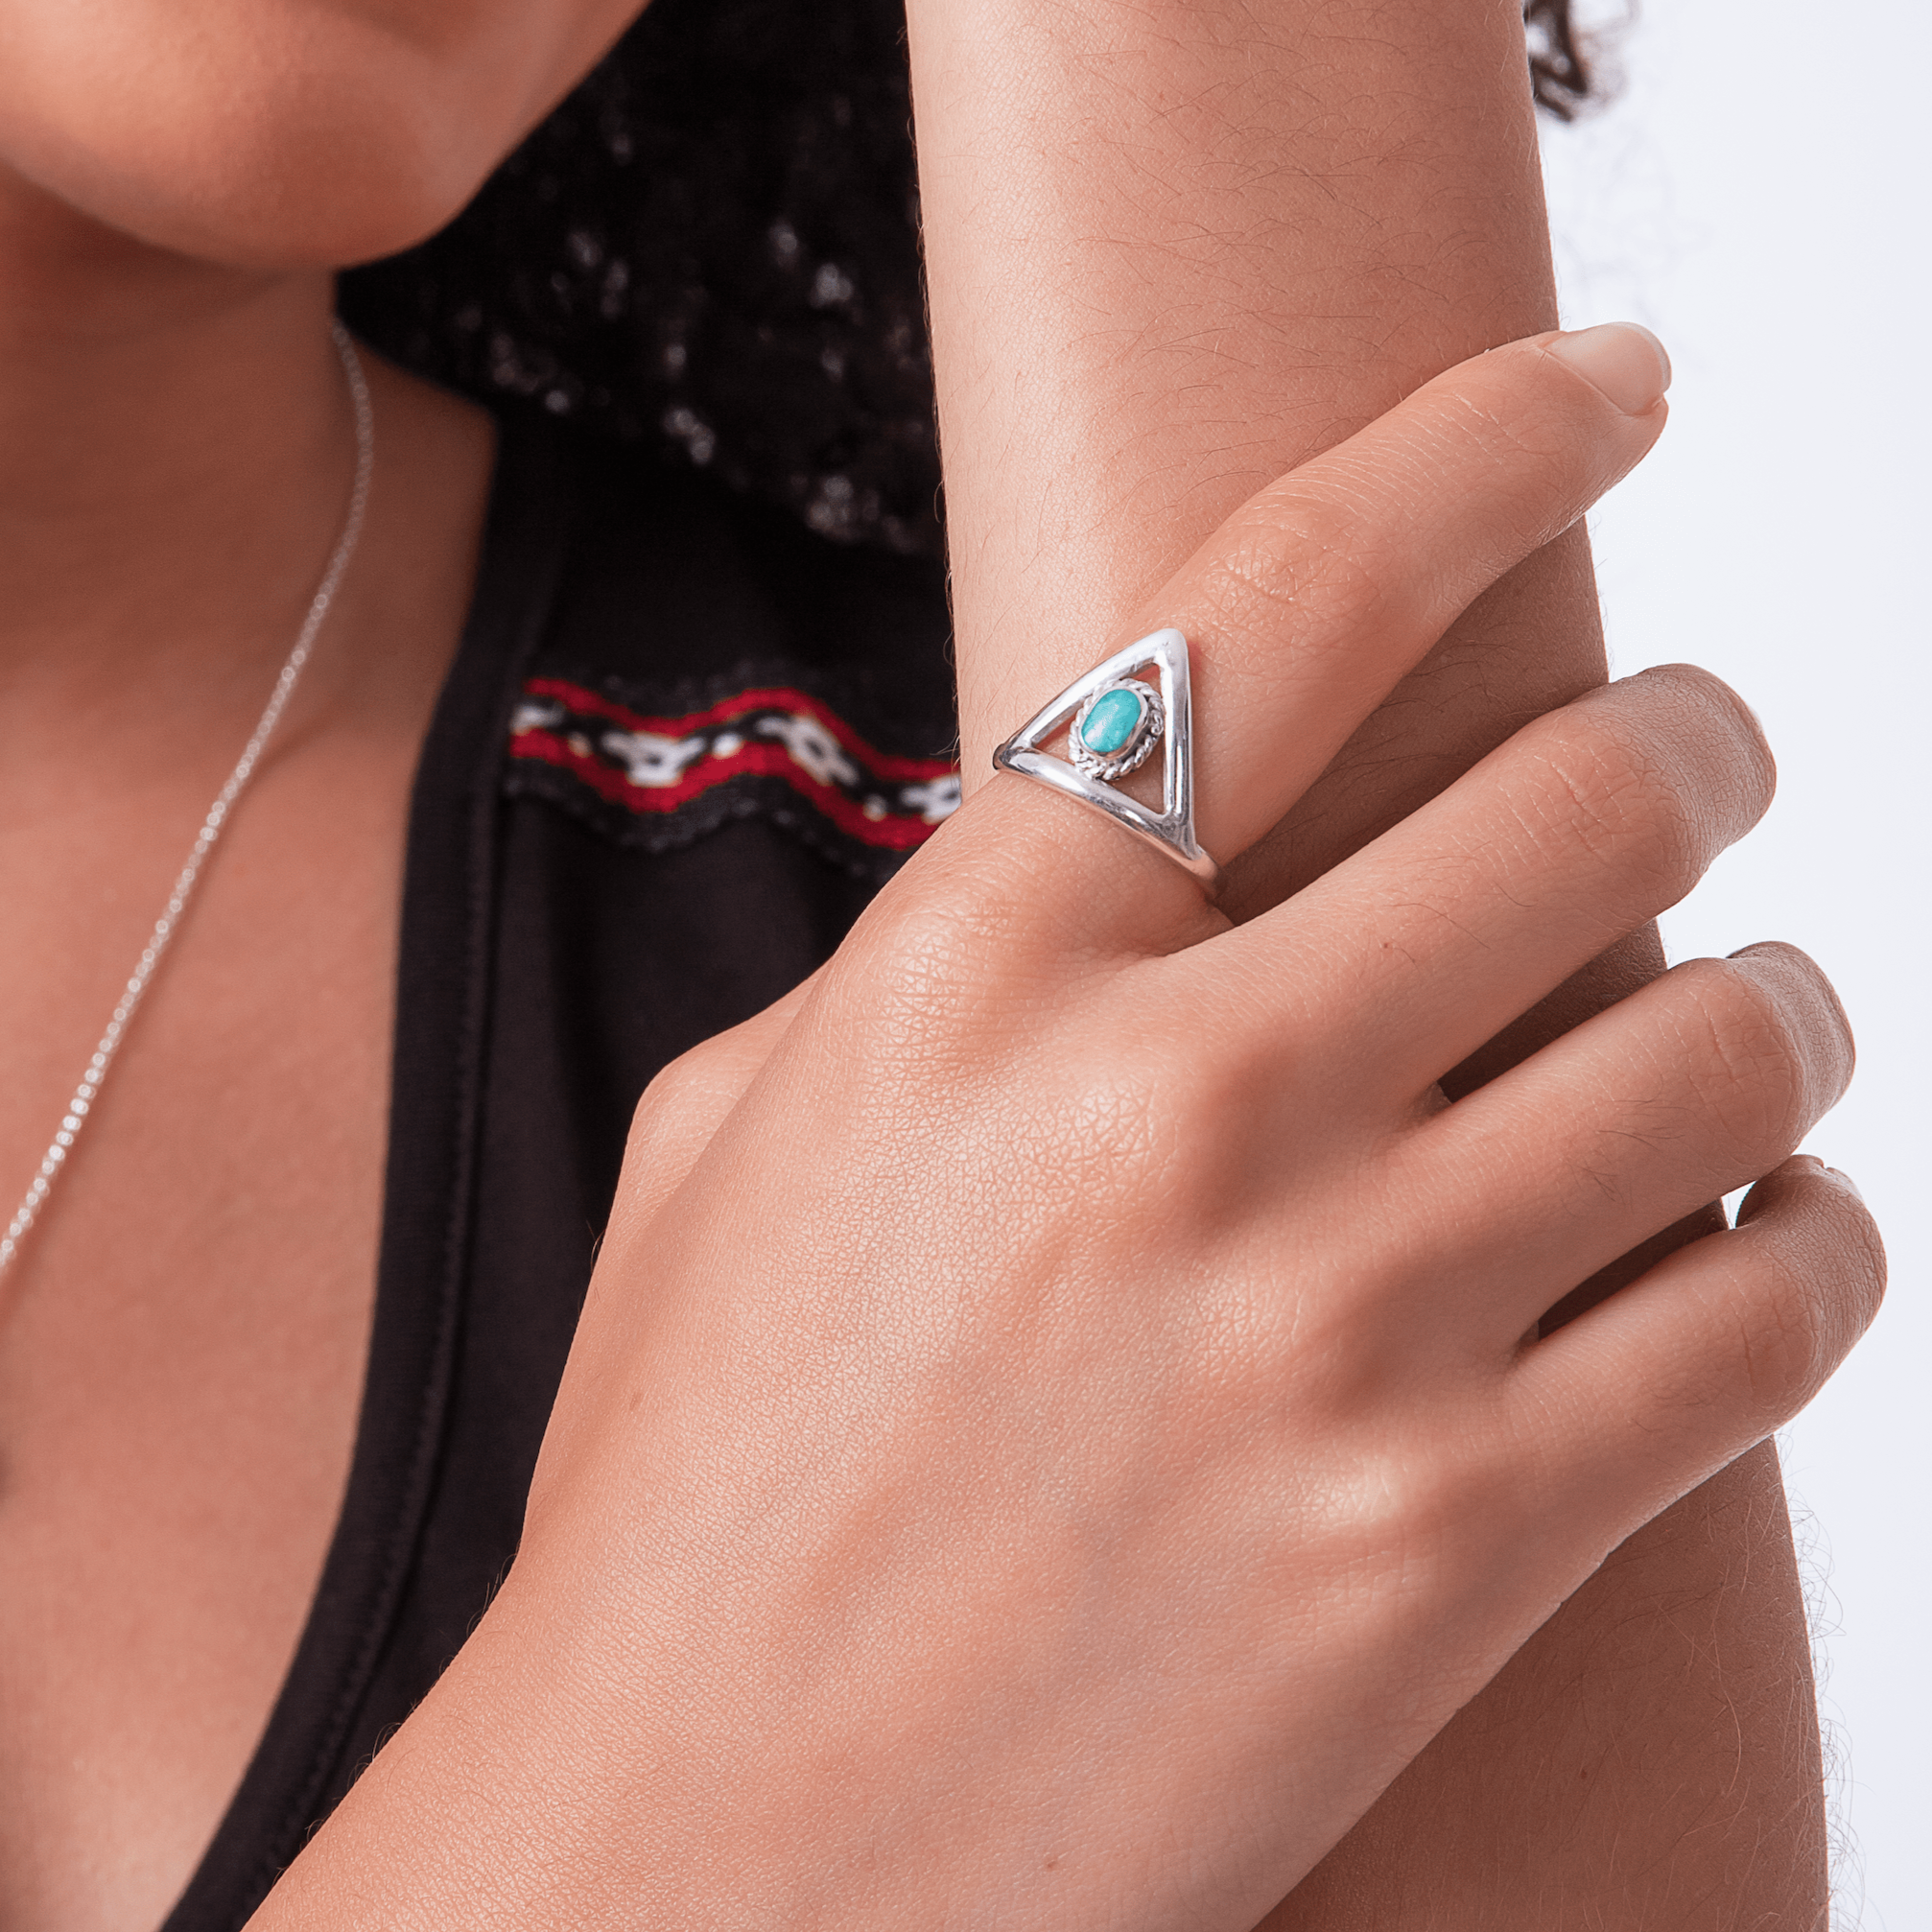 Triangular Amazonite and silver 950 adjustable ring